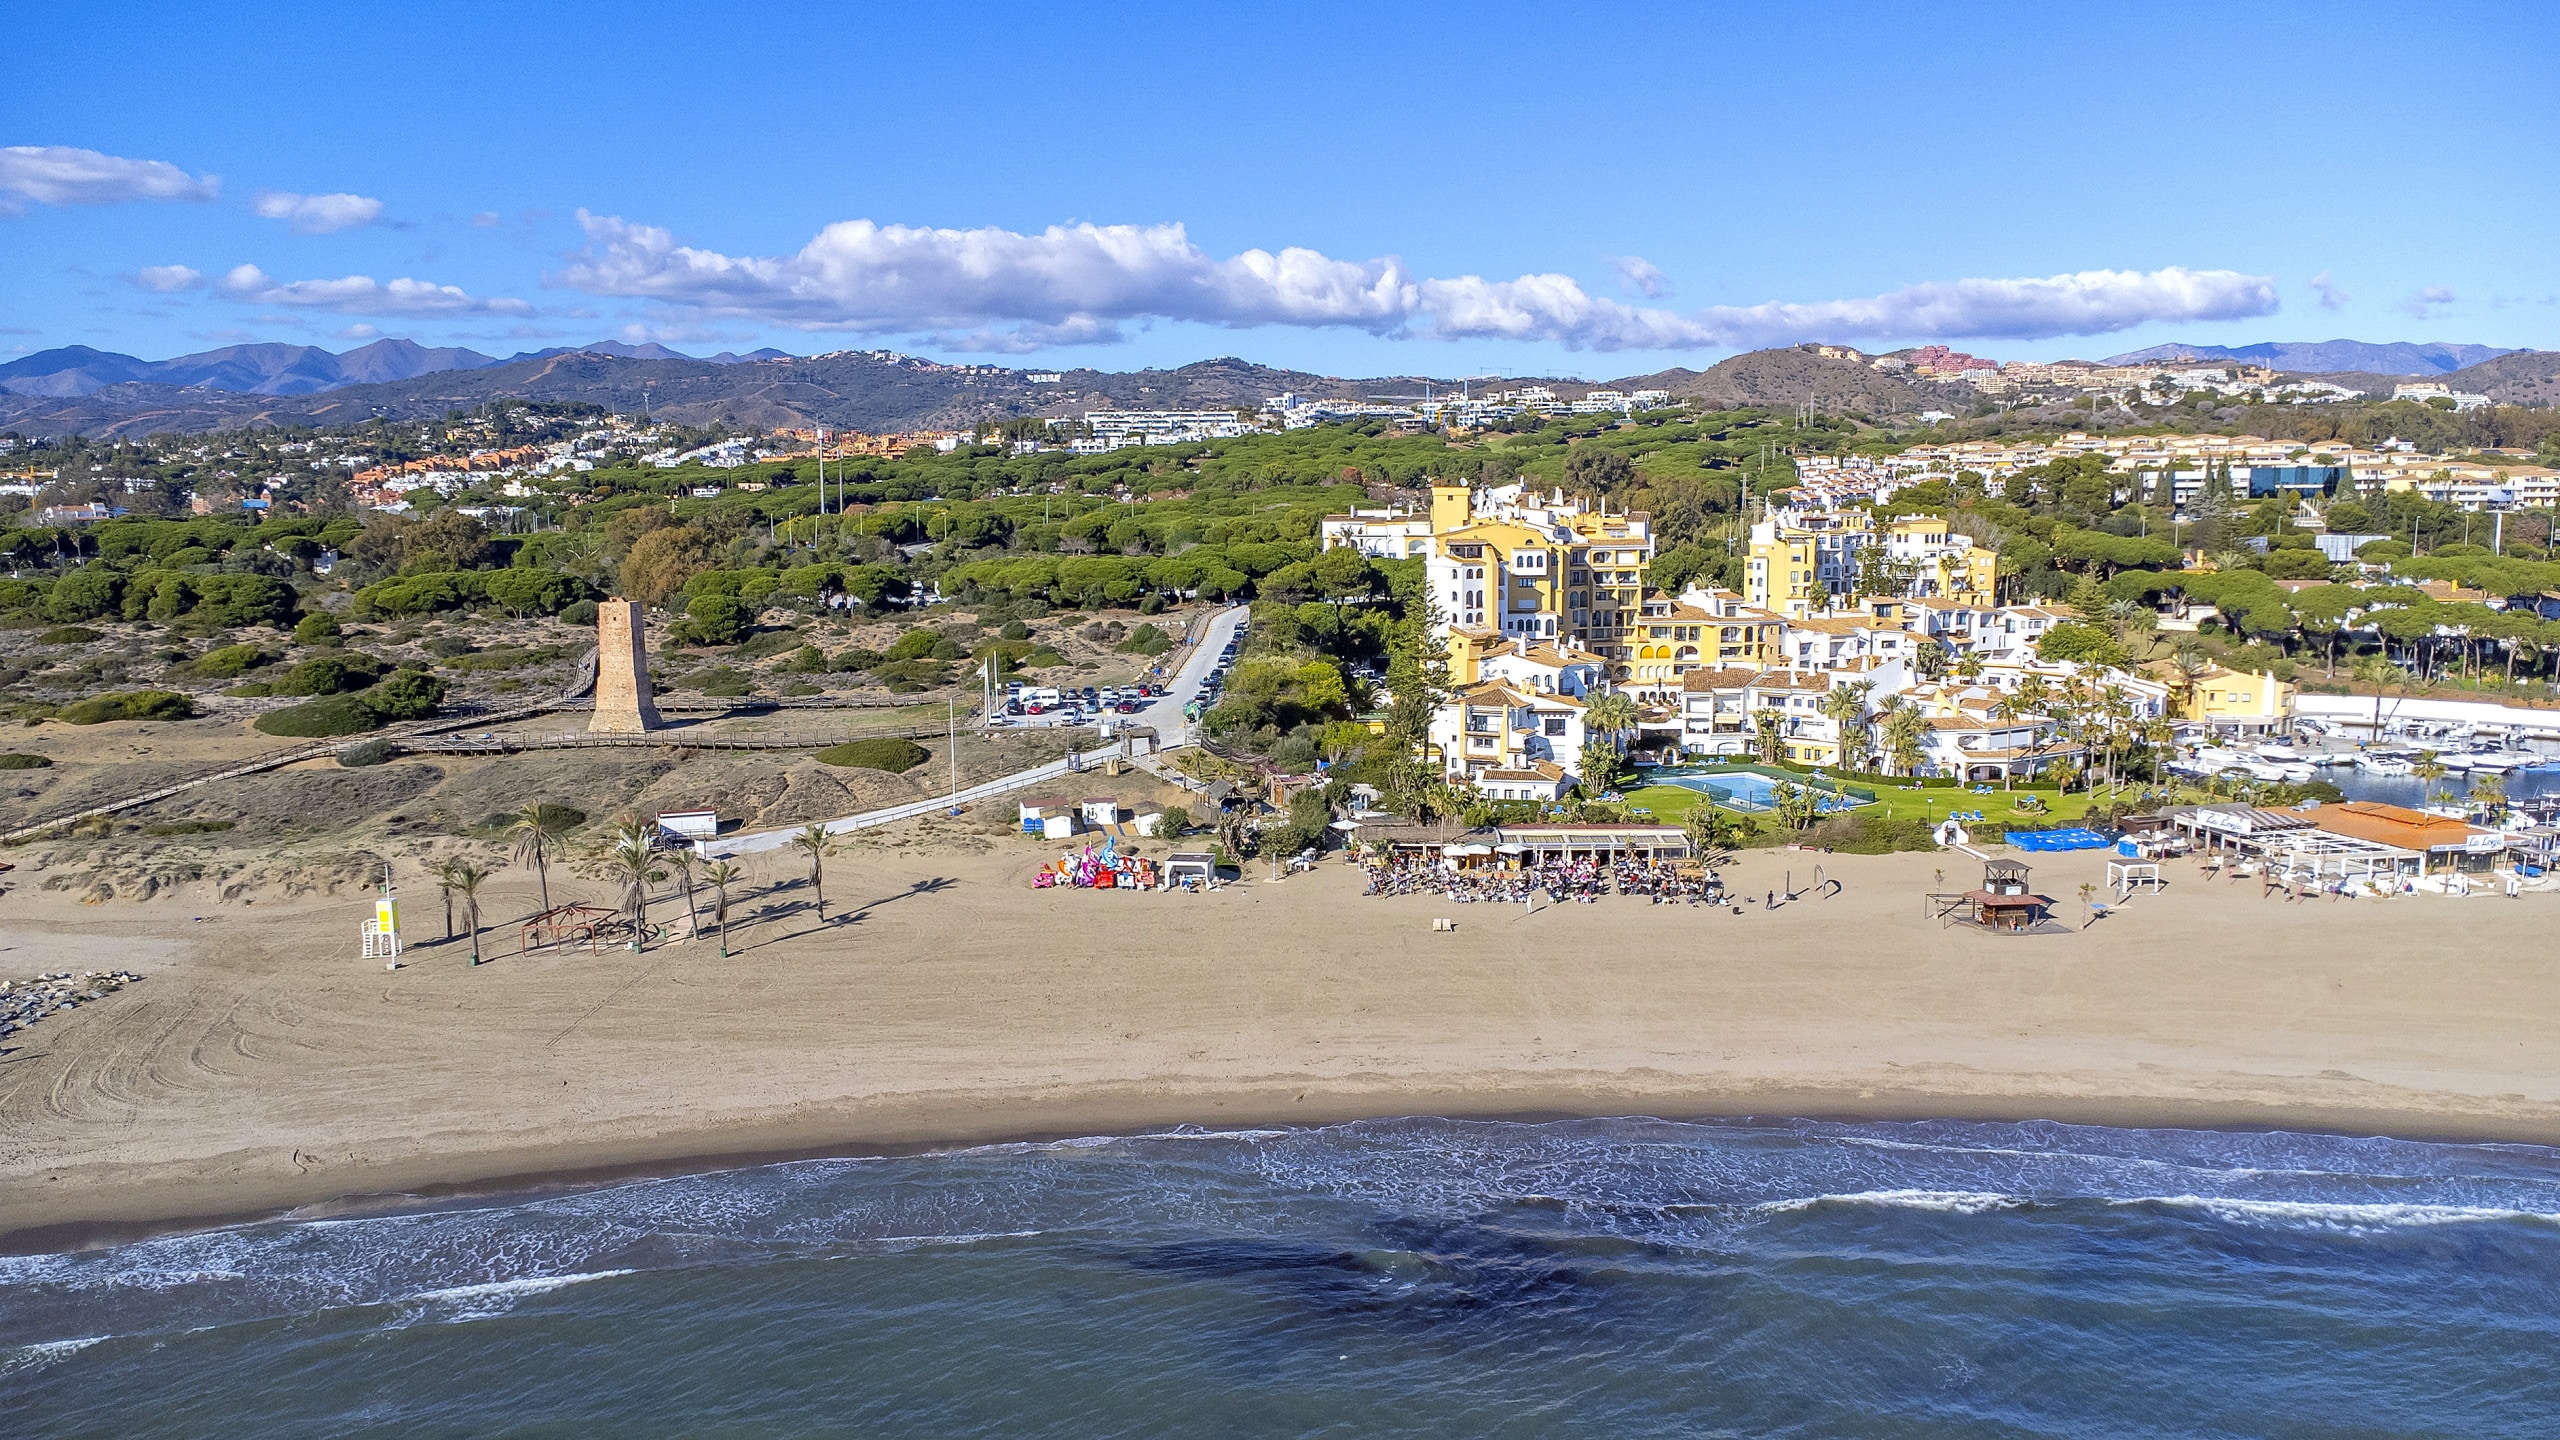 General view of the area where the holiday apartment in Cabopino, Marbella is located.